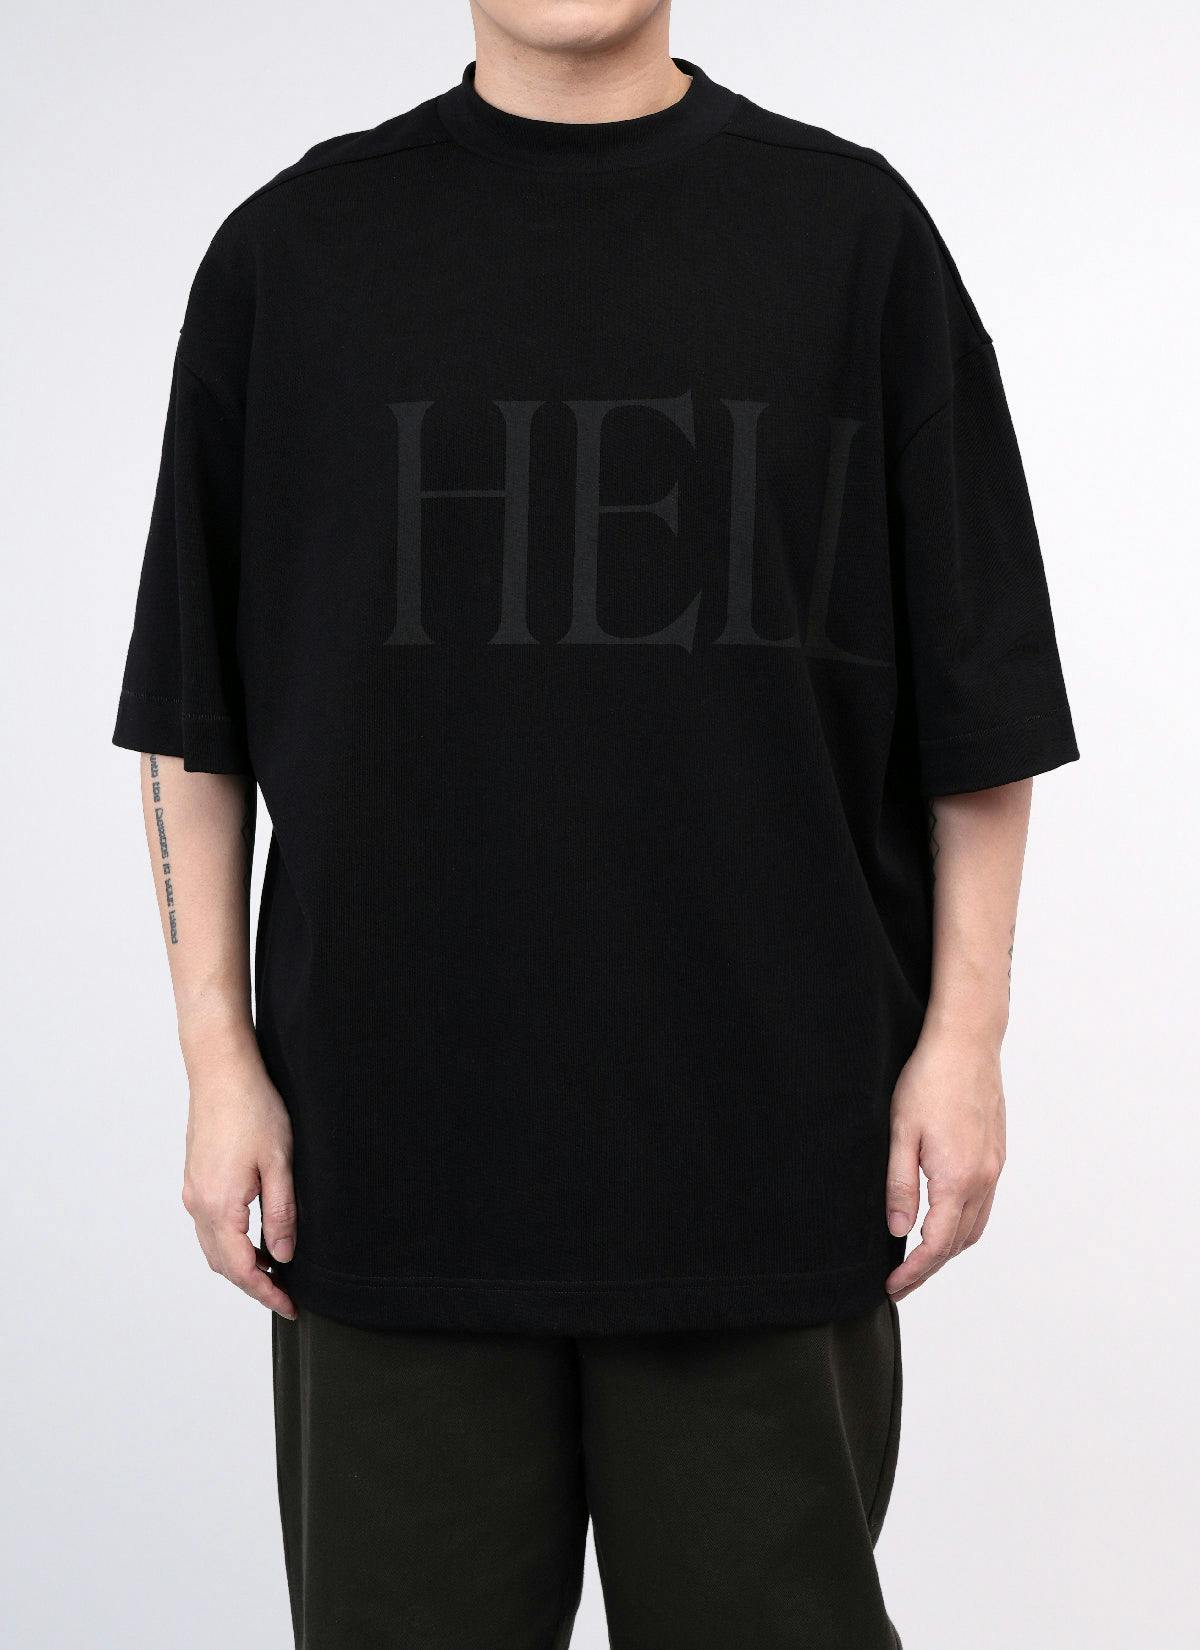 ˝HELLO˝  Relaxed T-Shirt Black